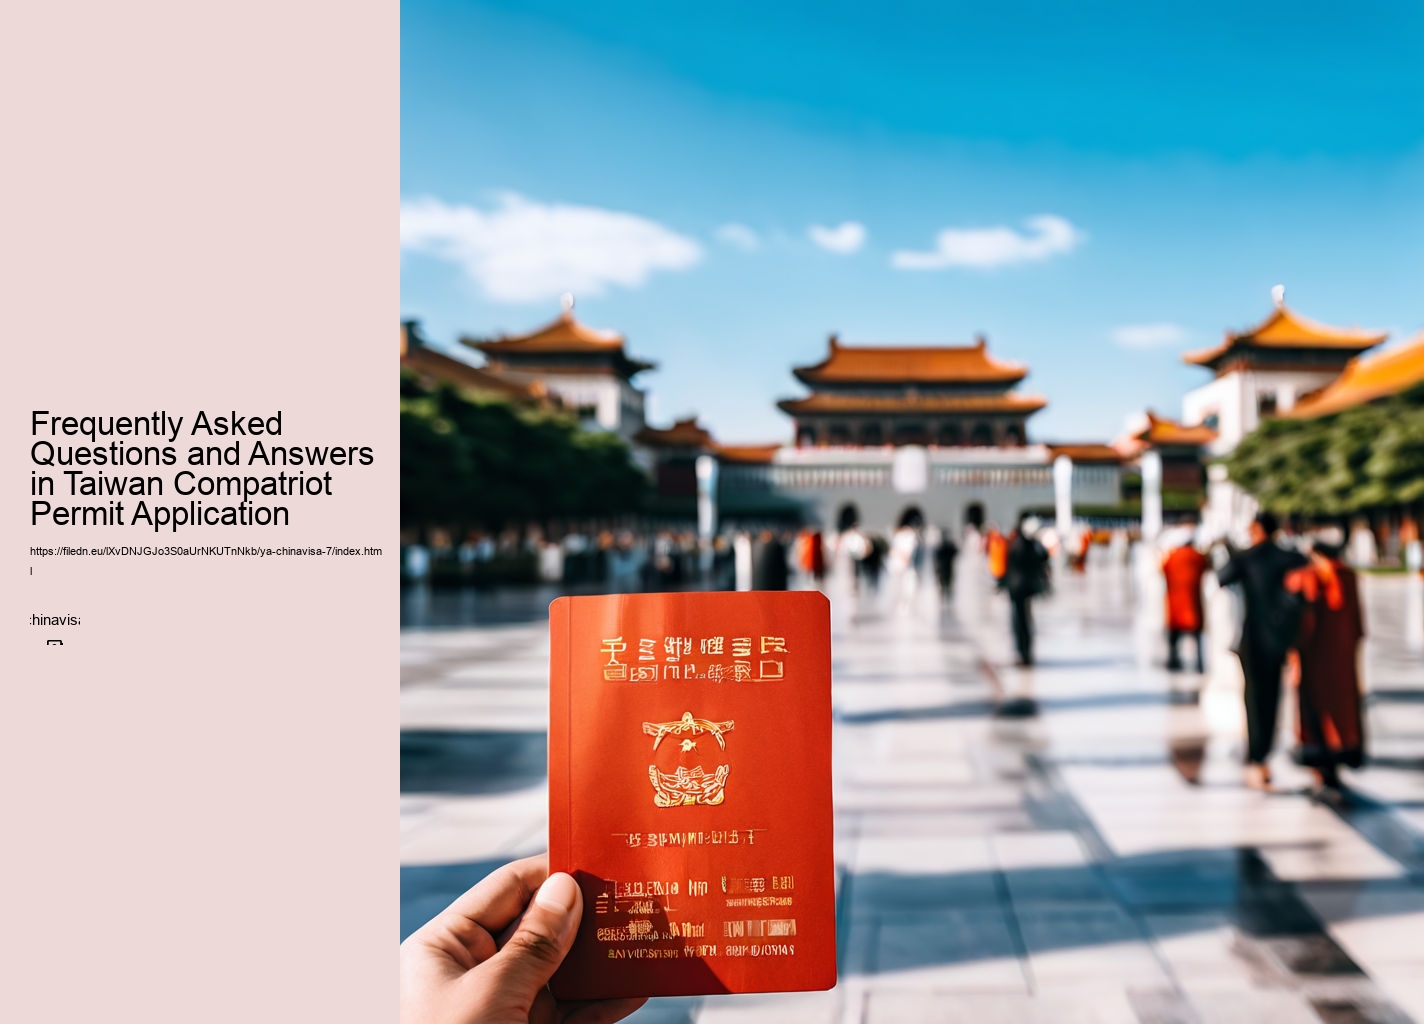 Frequently Asked Questions and Answers in Taiwan Compatriot Permit Application